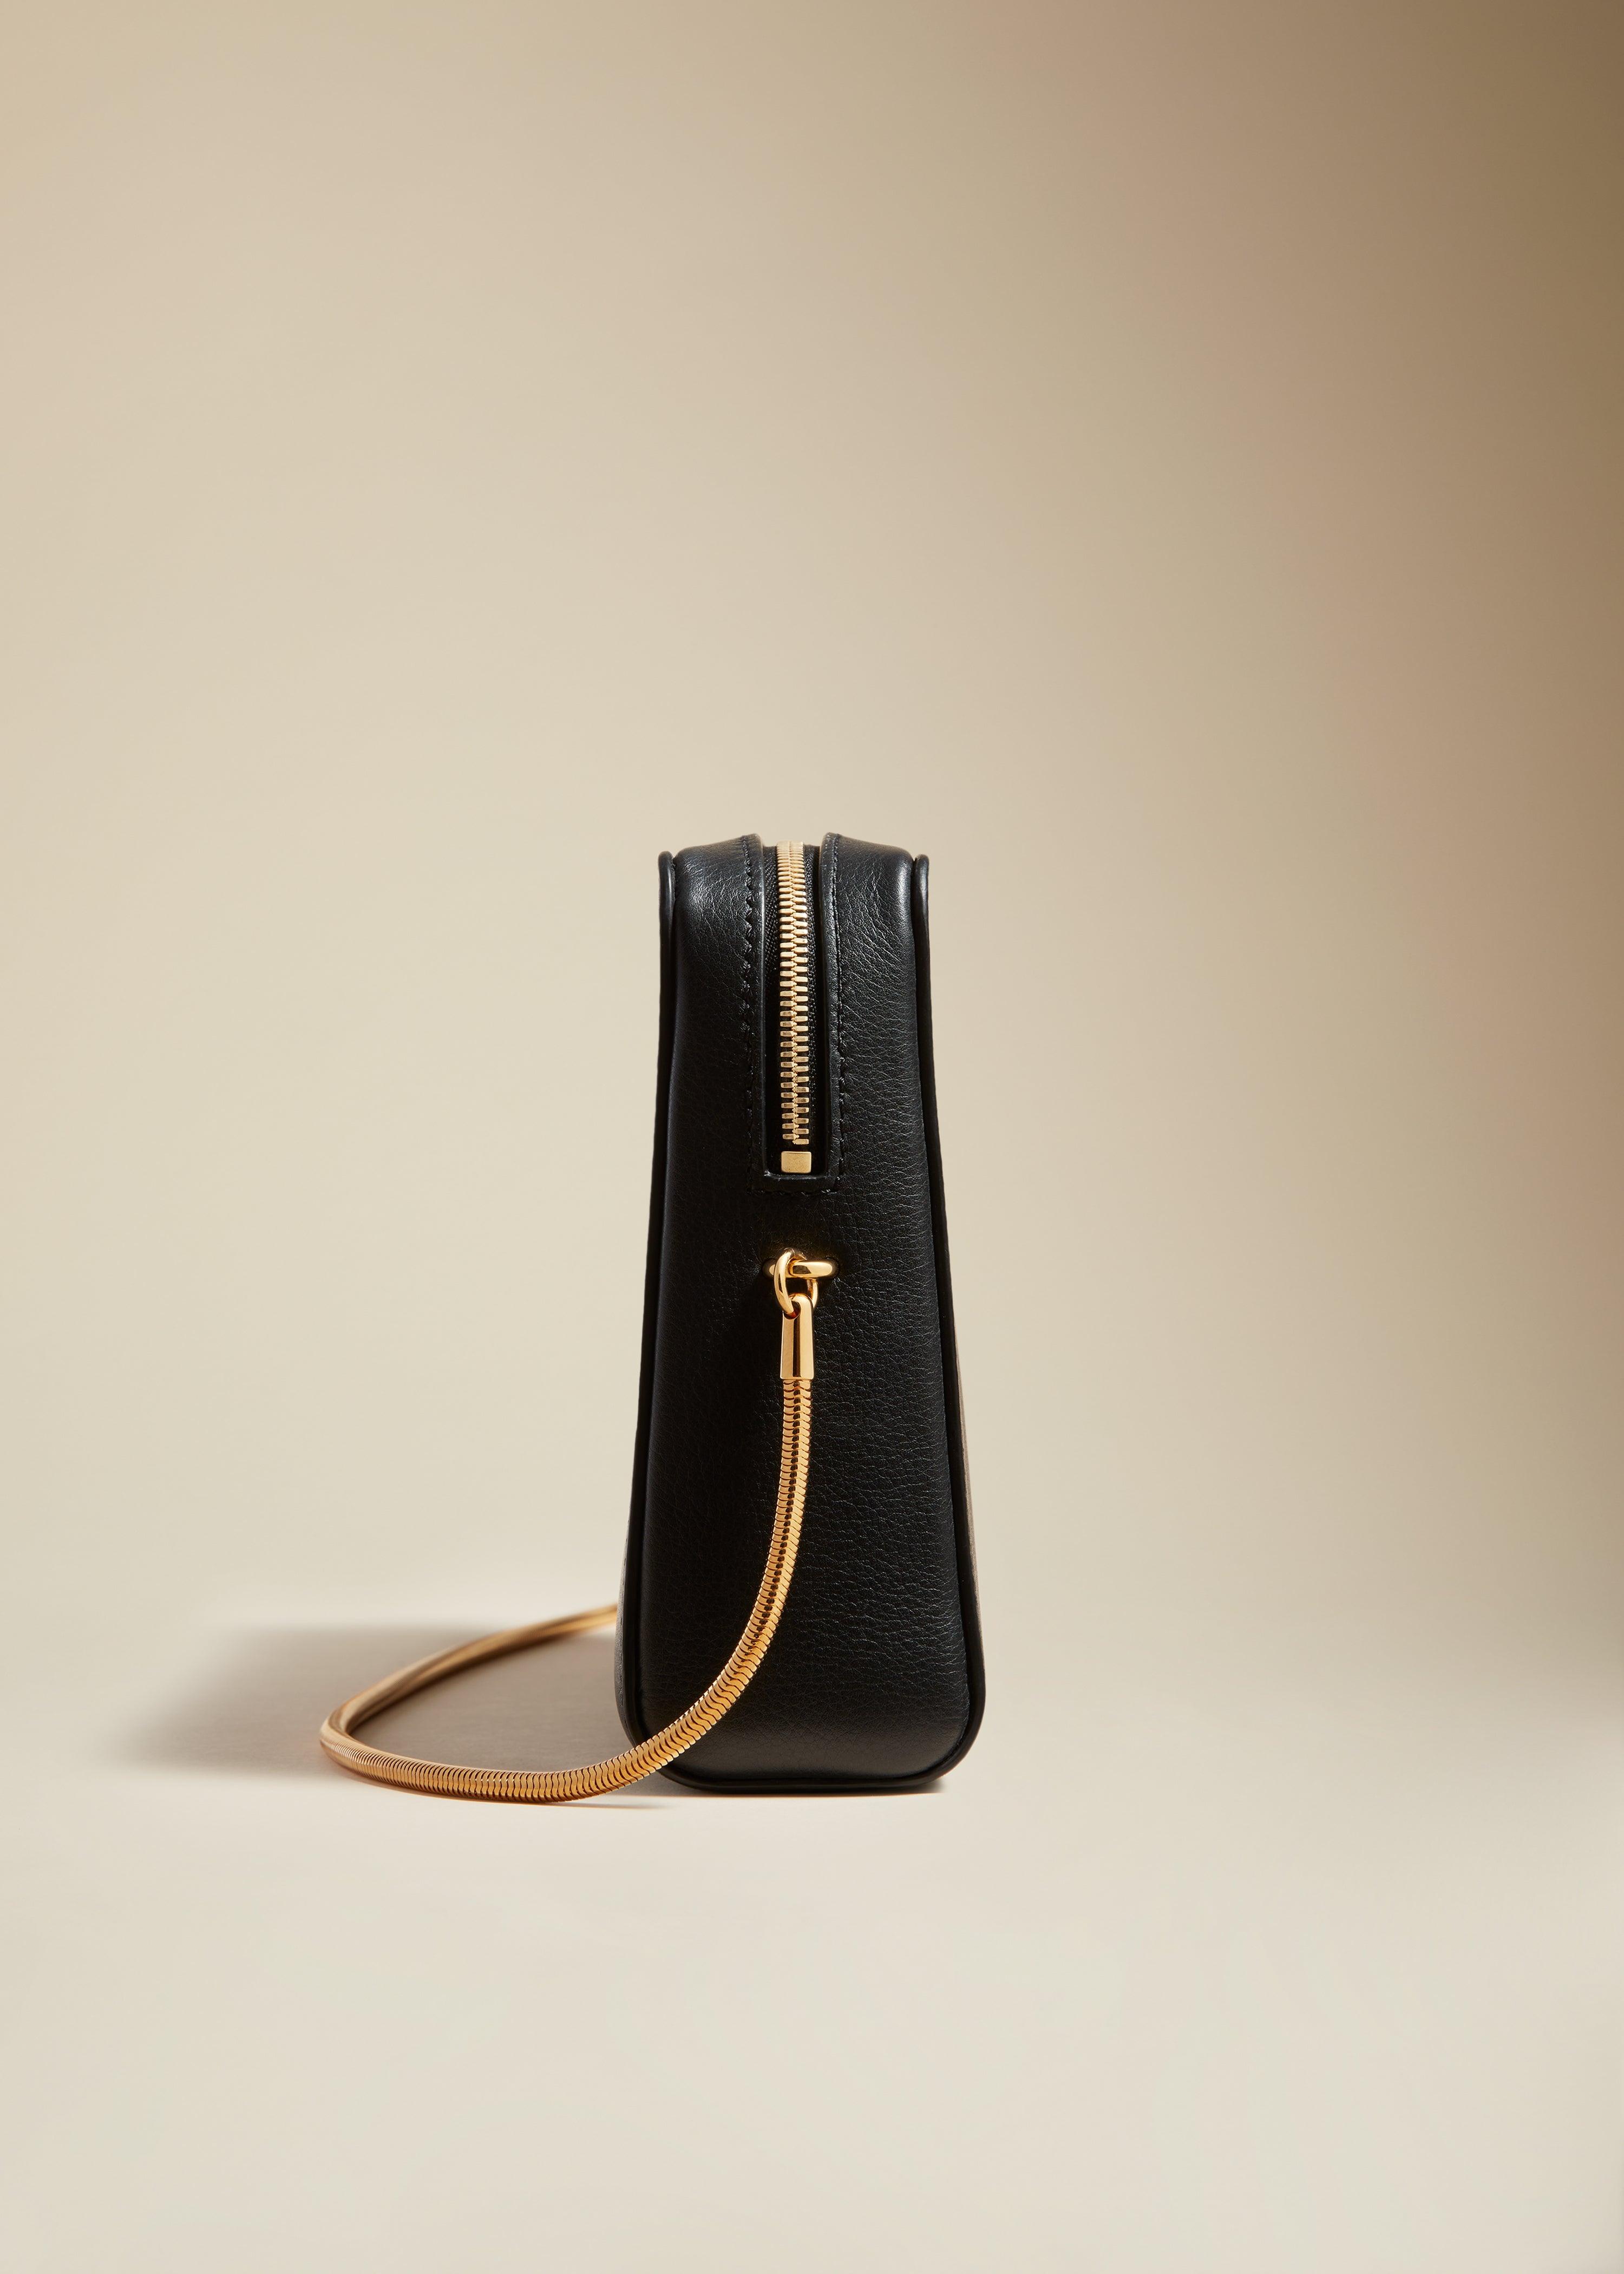 The Anna Crossbody Bag in Black Leather - The Iconic Issue